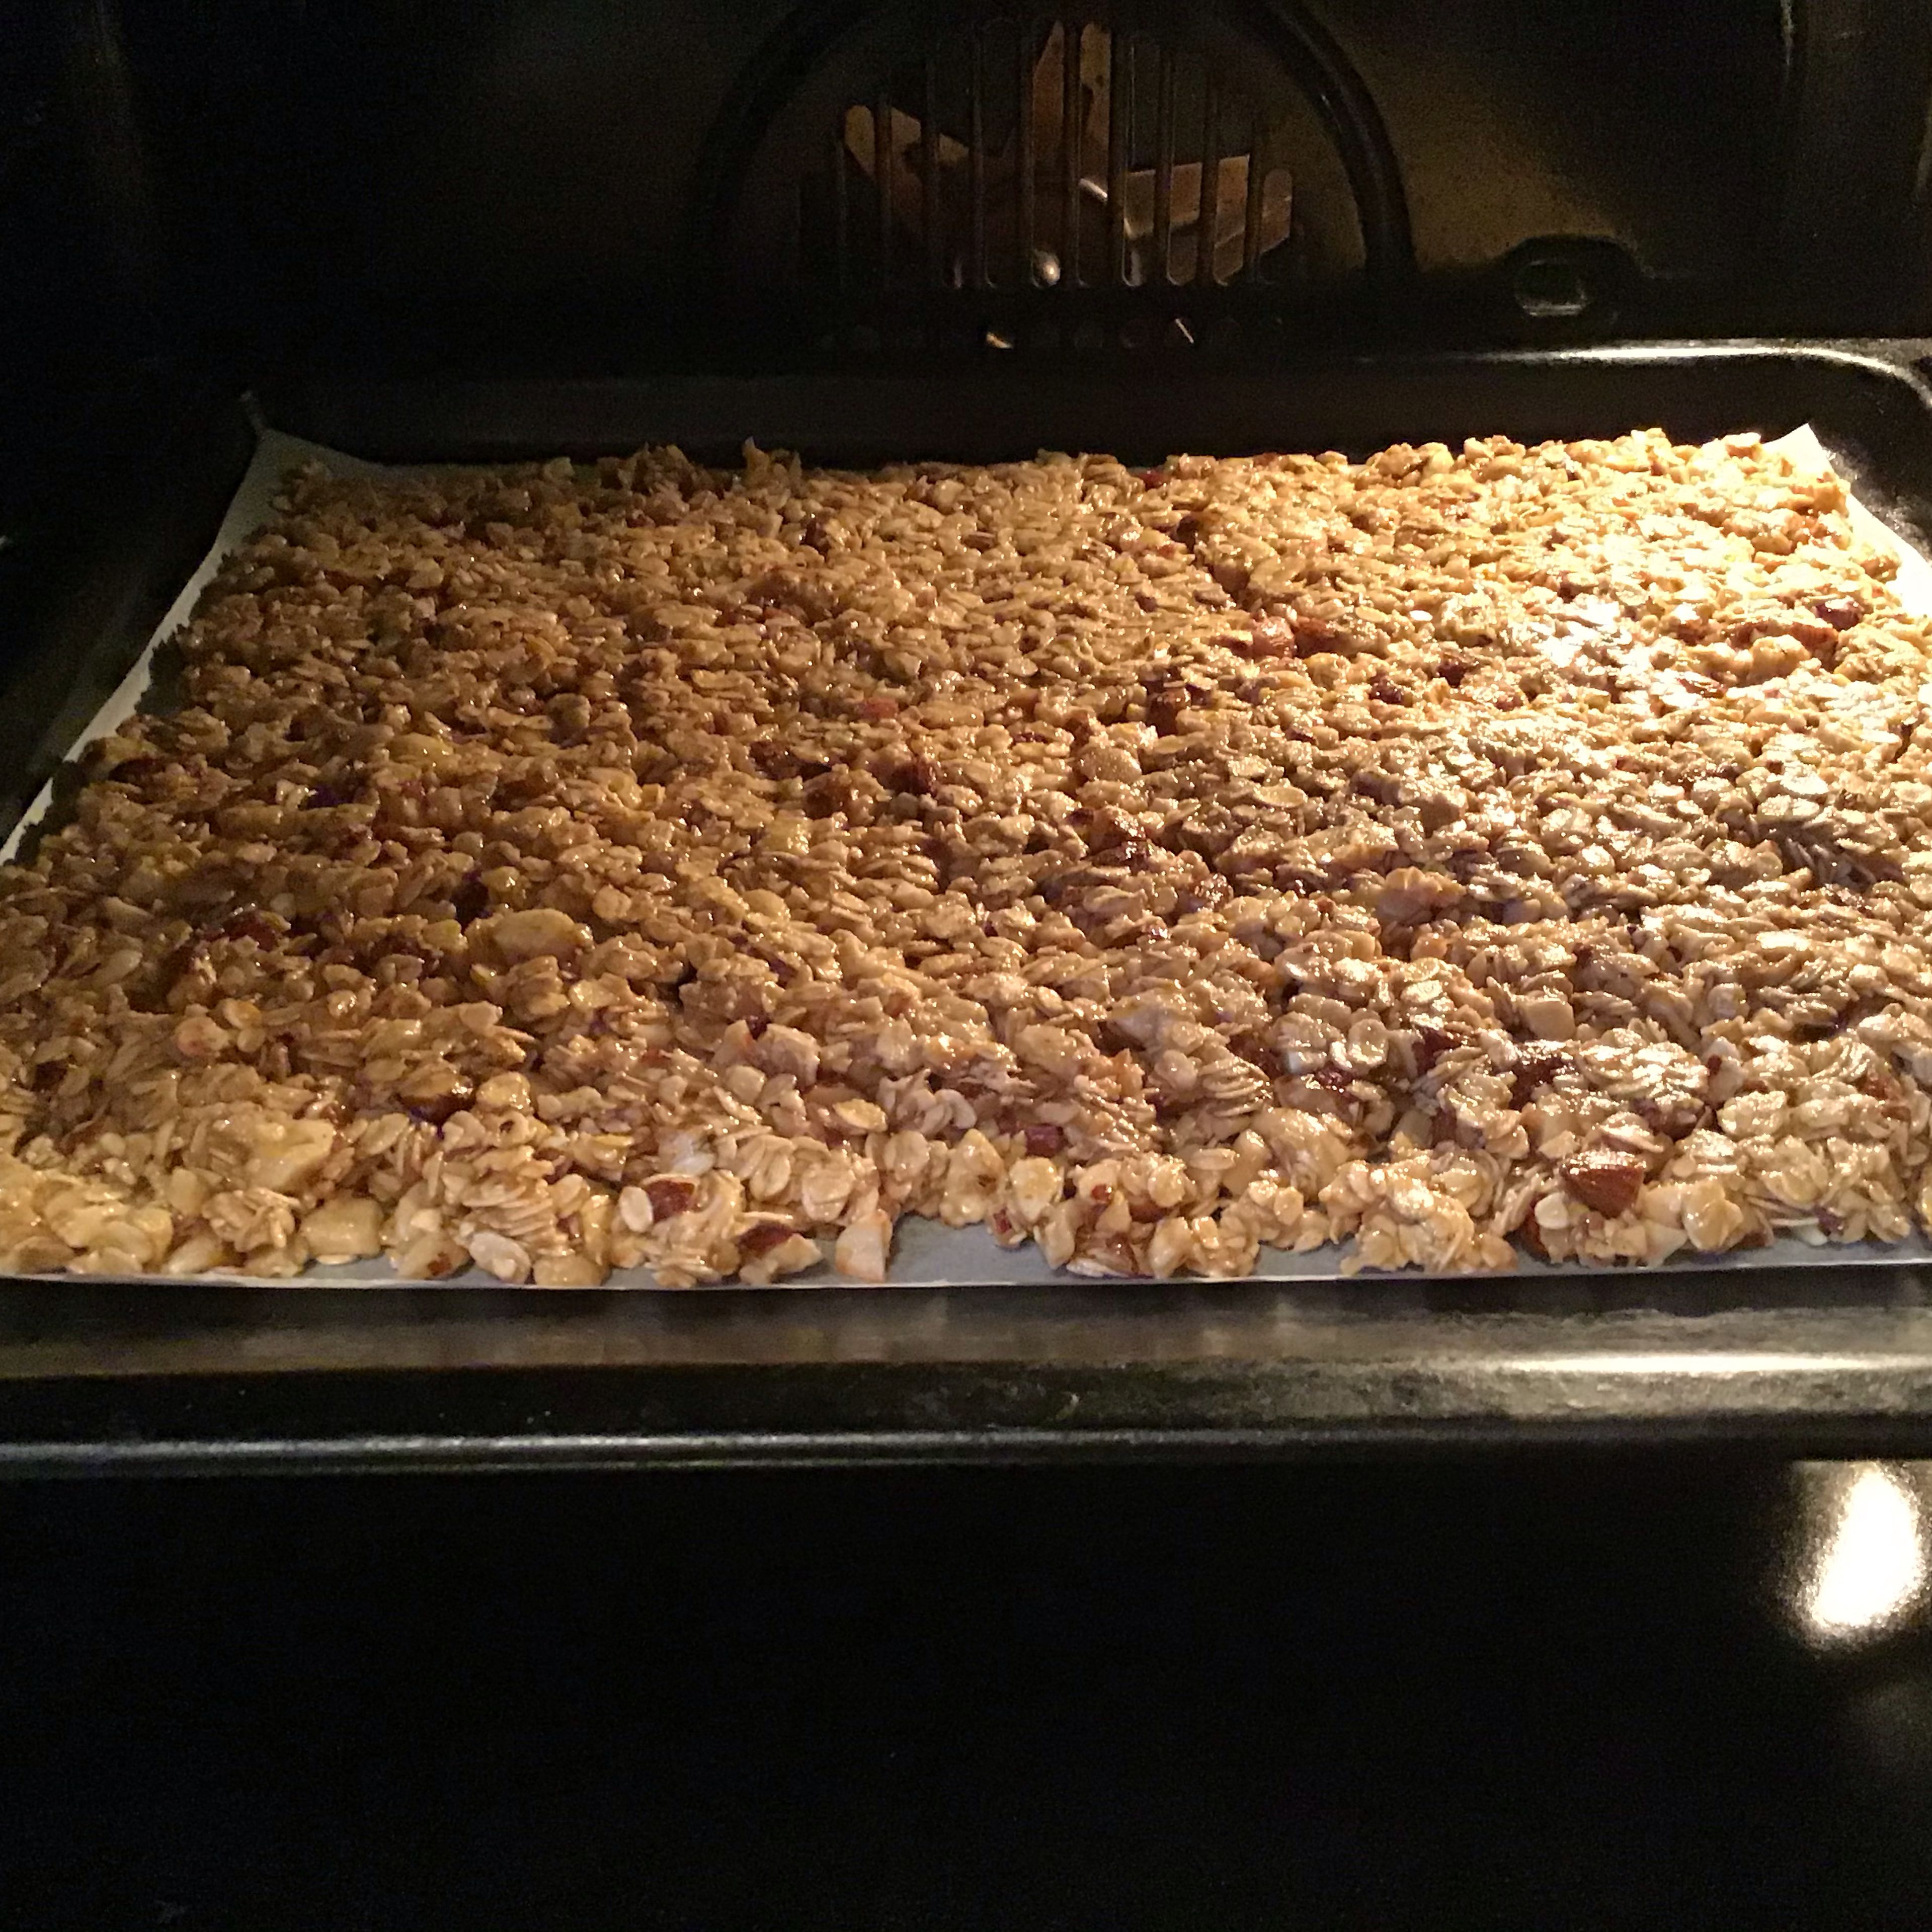 Bake at 160`C for 40 minutes, stirring the mixture every 10 minutes